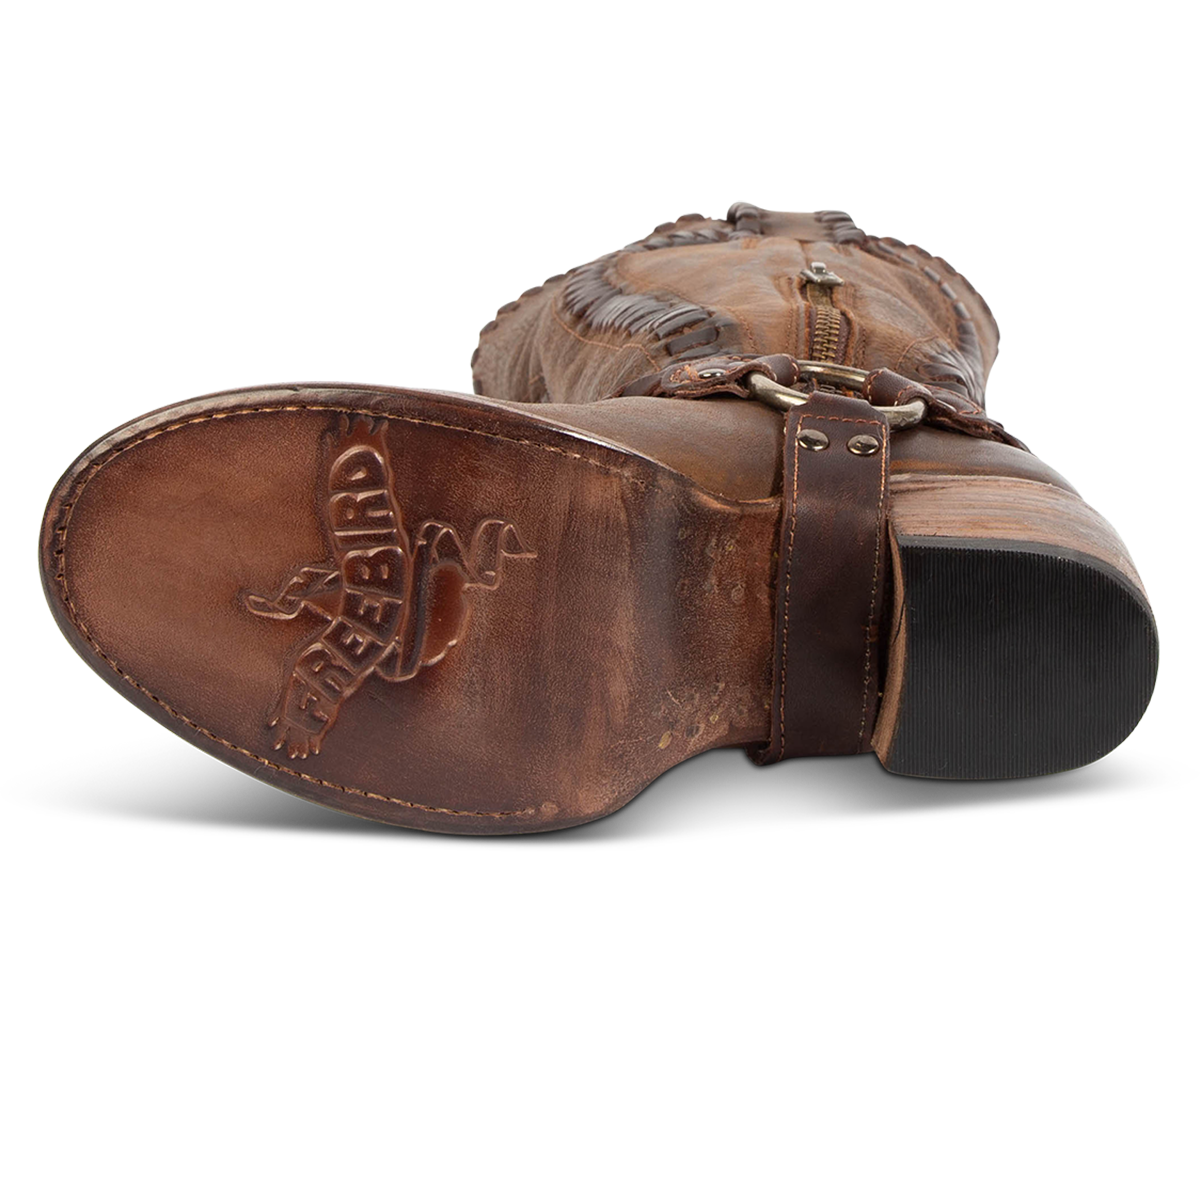 Leather sole imprinted with FREEBIRD on women's Clover brown leather boot 